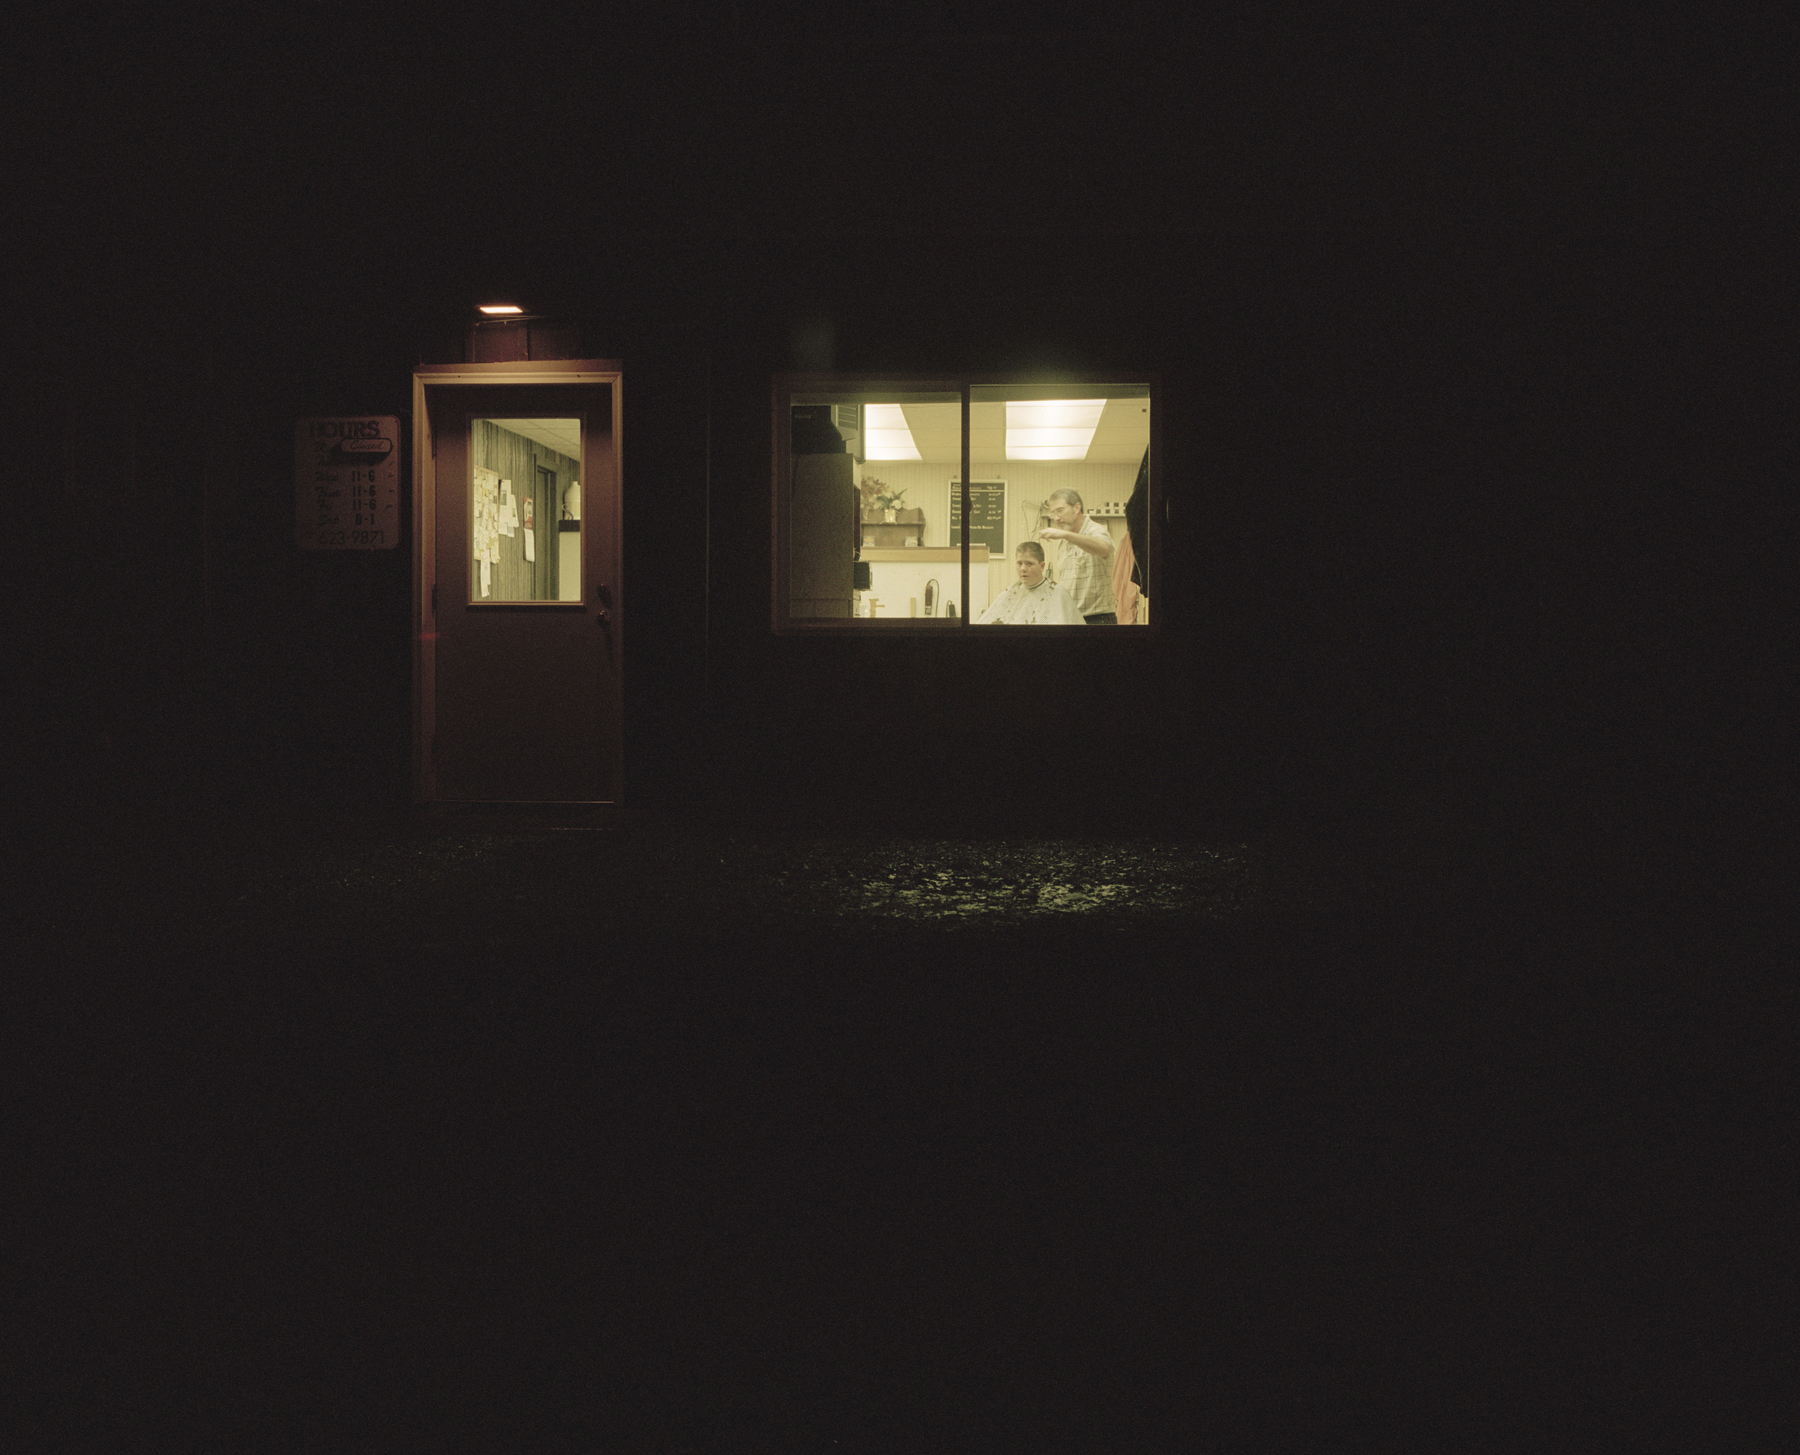    Barber Shop at Night, Constantia, NY.,    2007    Ink jet print, edition of 5 + 2AP    9.5 x 11.75 inches  